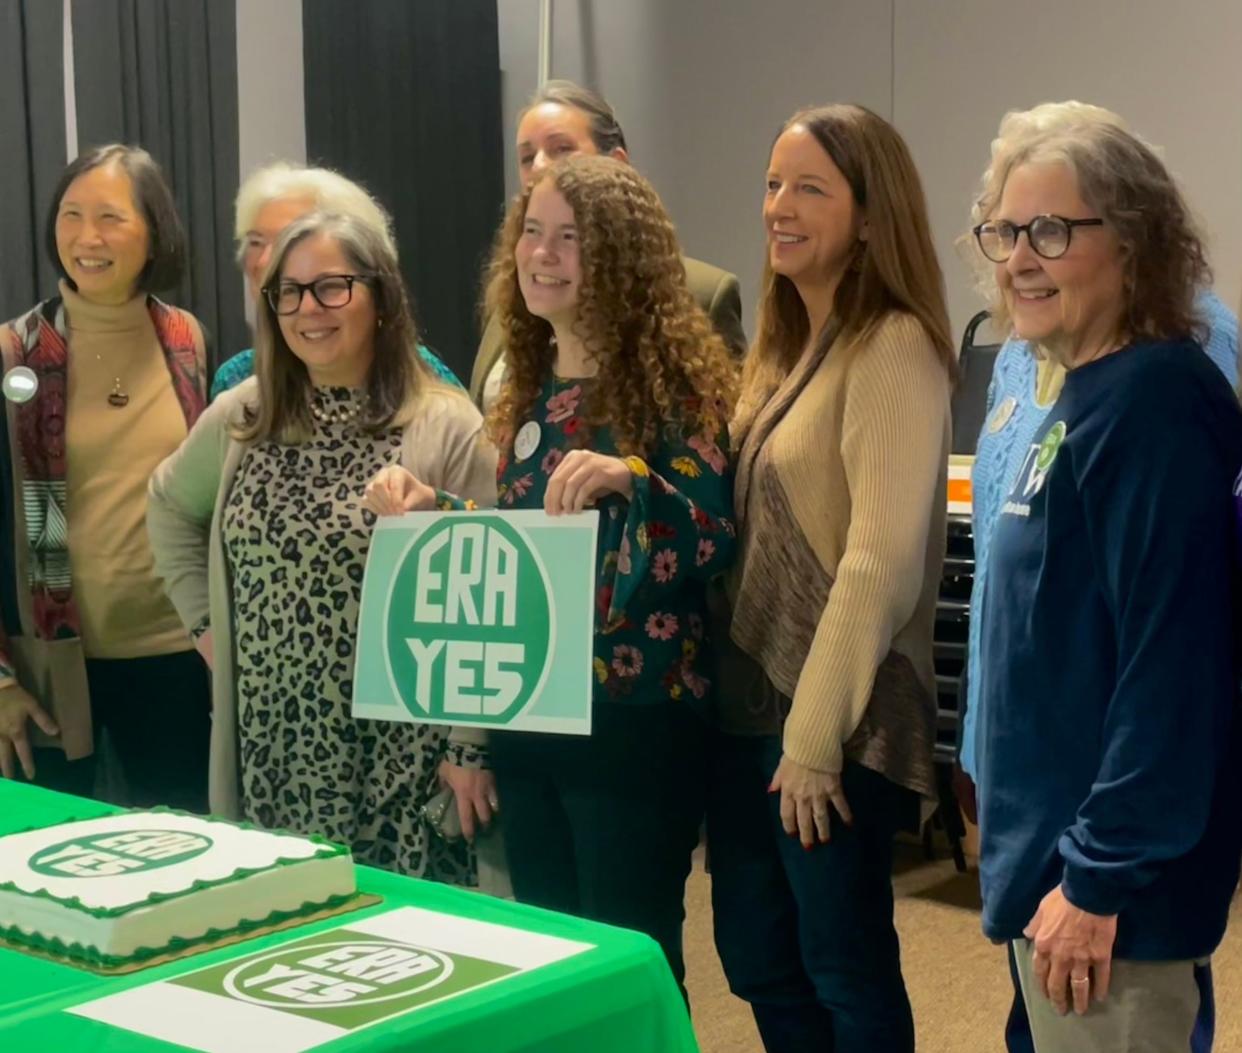 Irene Strohbeen, Mary Ann Rossi, Lori Palmeri, Lee Snodgrass, Megan Eisenstein, Julie Keller and Becky O'Connor pose for a photo at a Feb. 5 press conference for the introduction of a state Equal Rights Amendment.